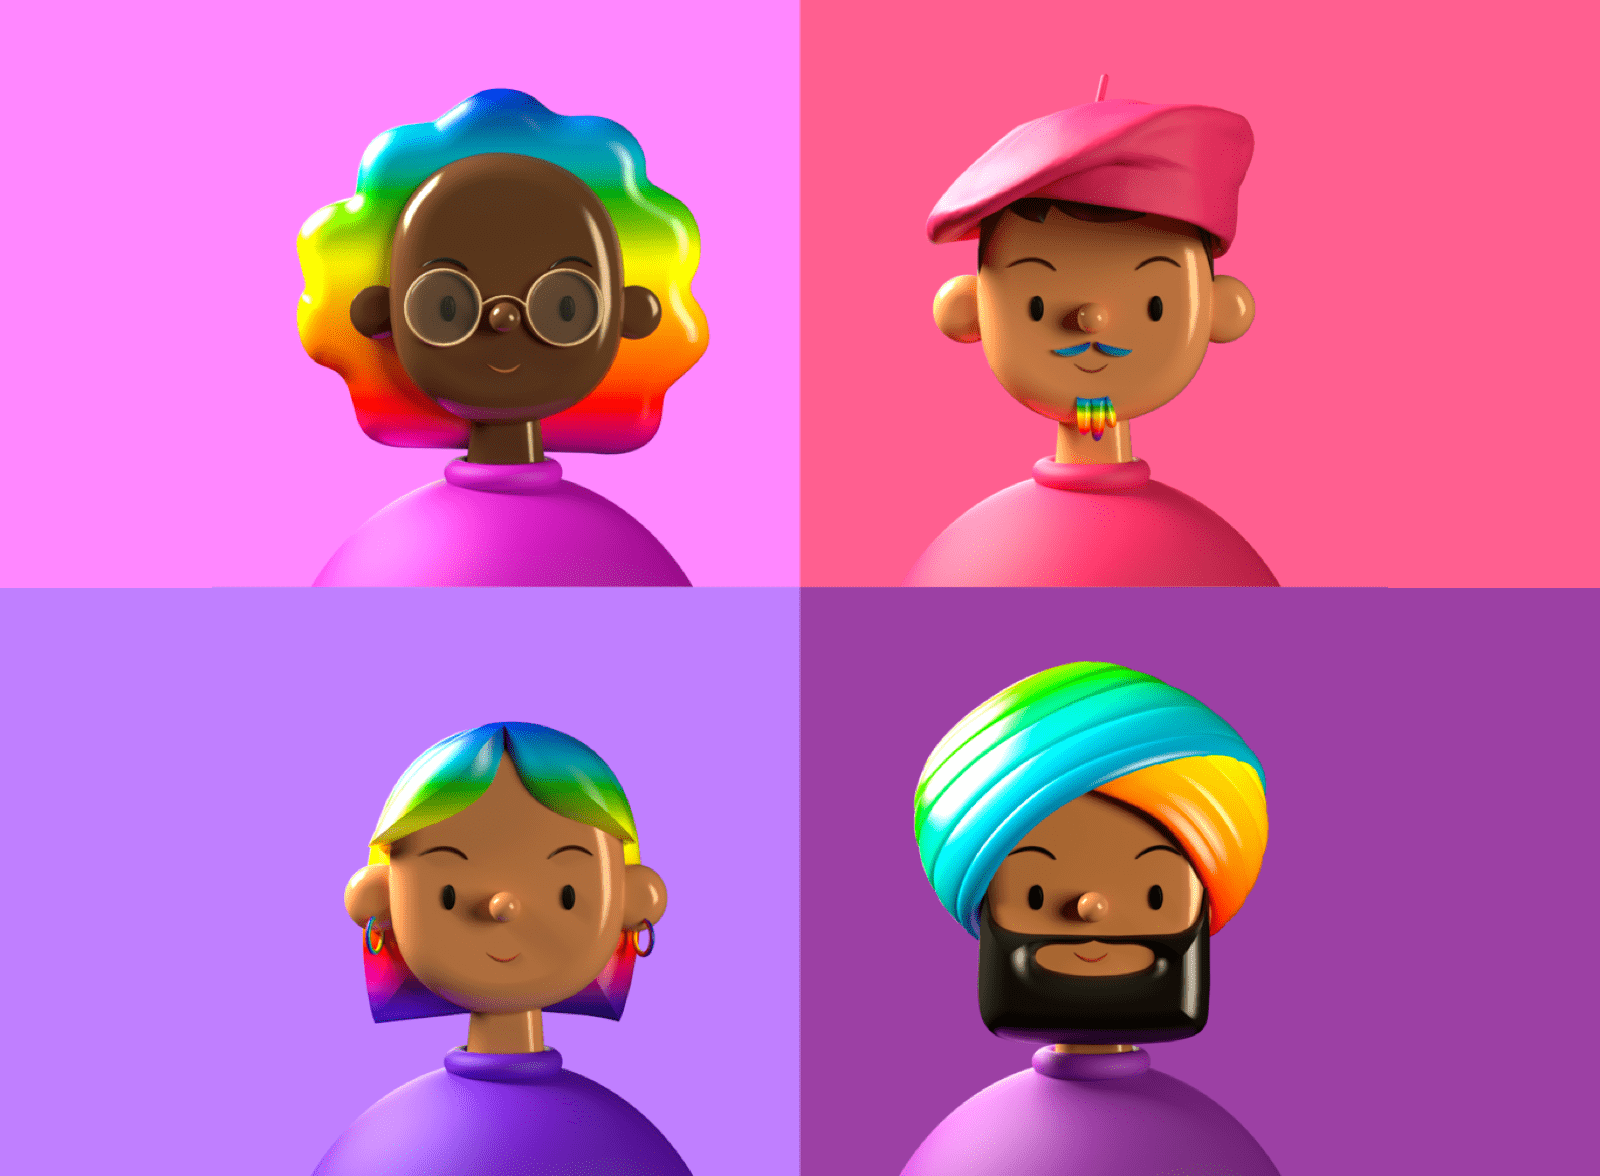 Free Toy Faces 3D Avatar Library illustrations Vectors SVGs and PNGs